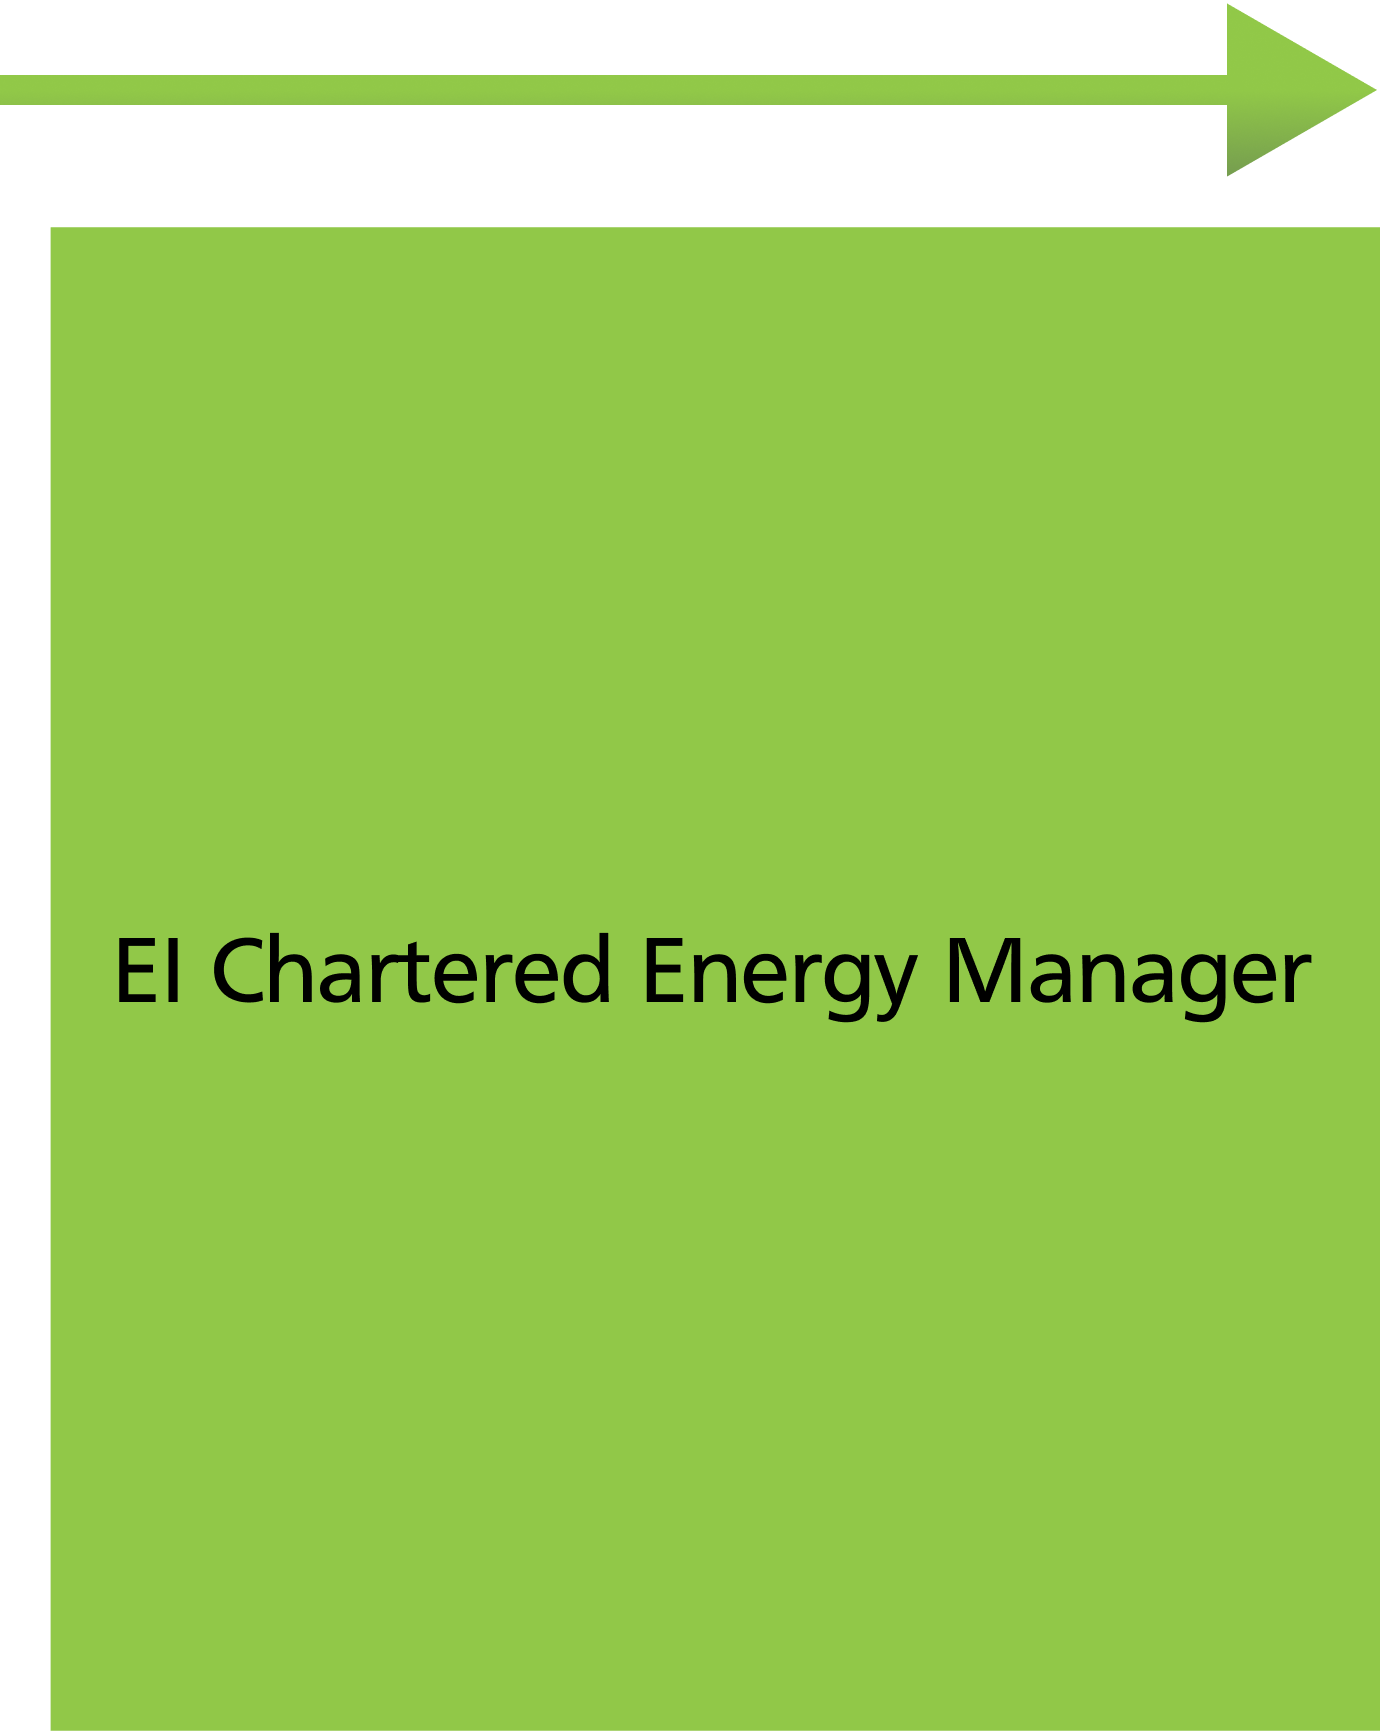 EI Chartered Energy Manager